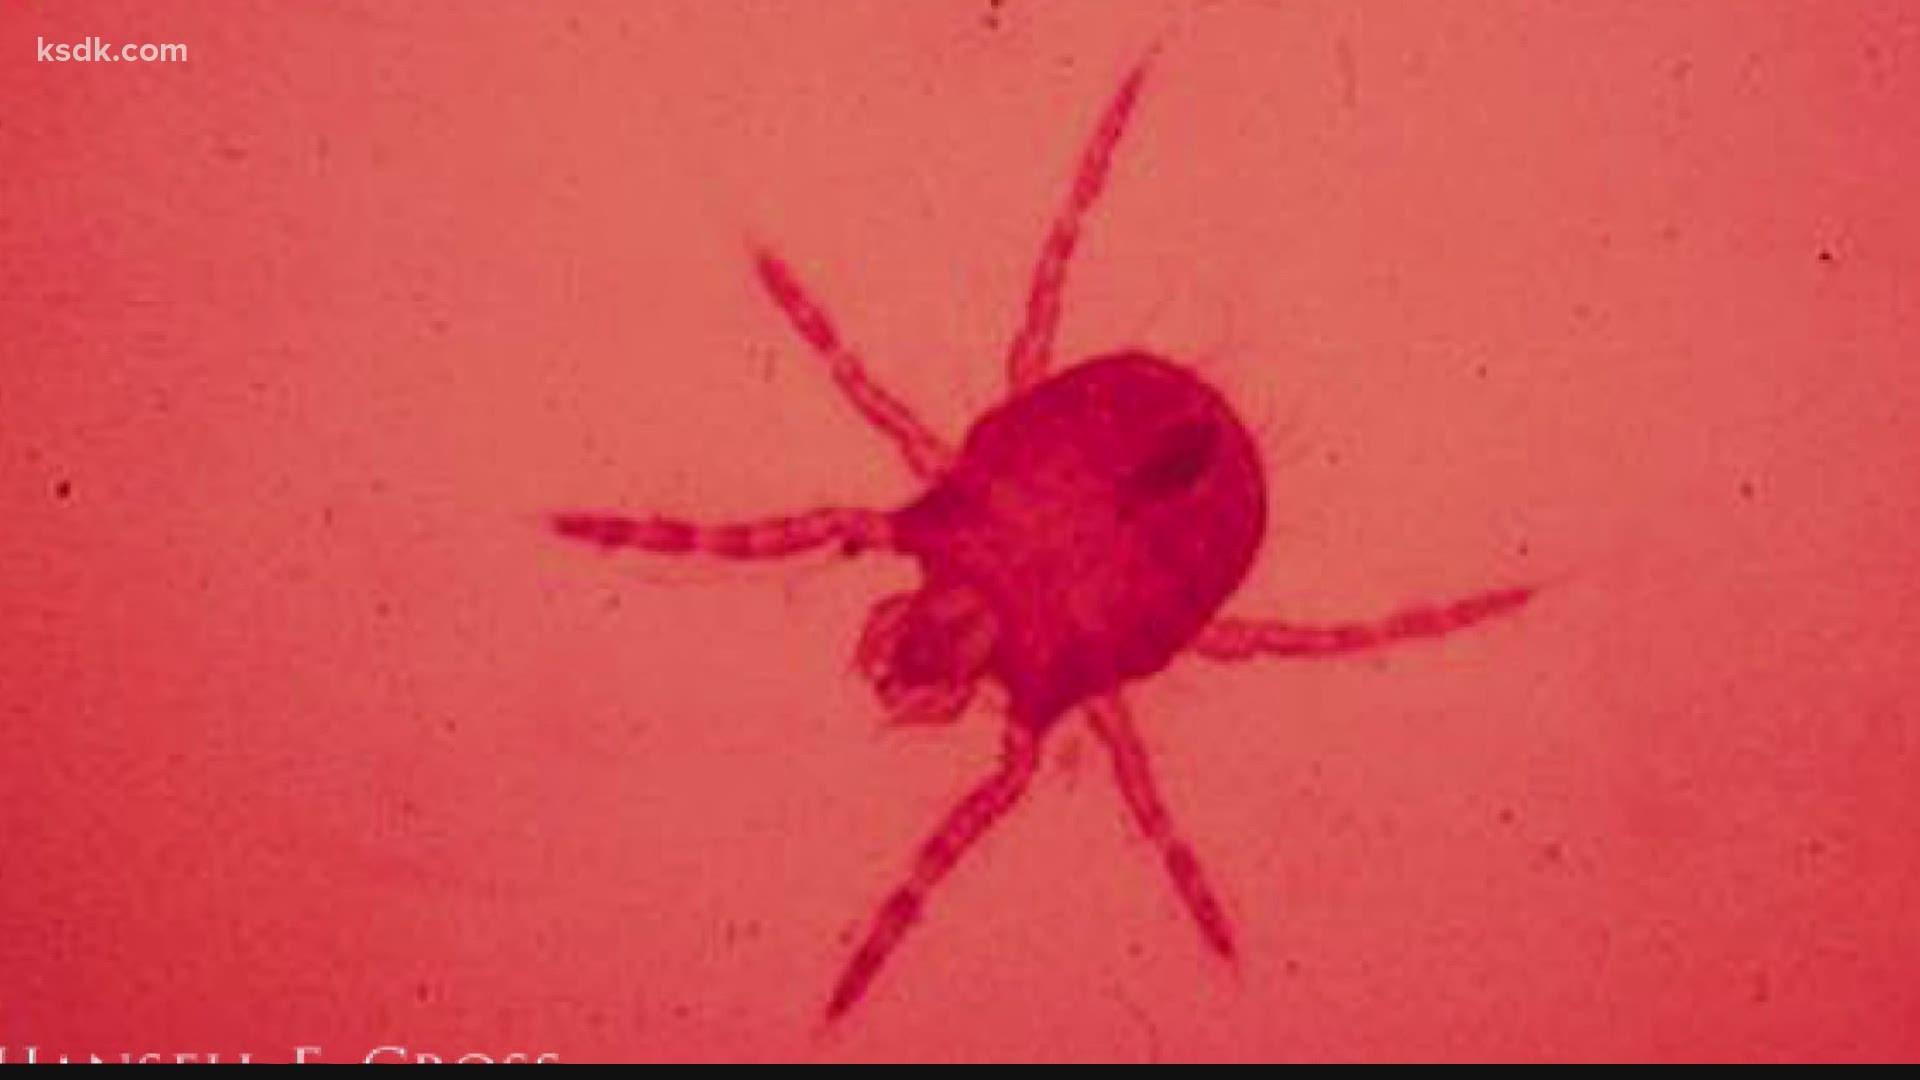 Chigger bites can be quite annoying, and they are particularly common around this time of years